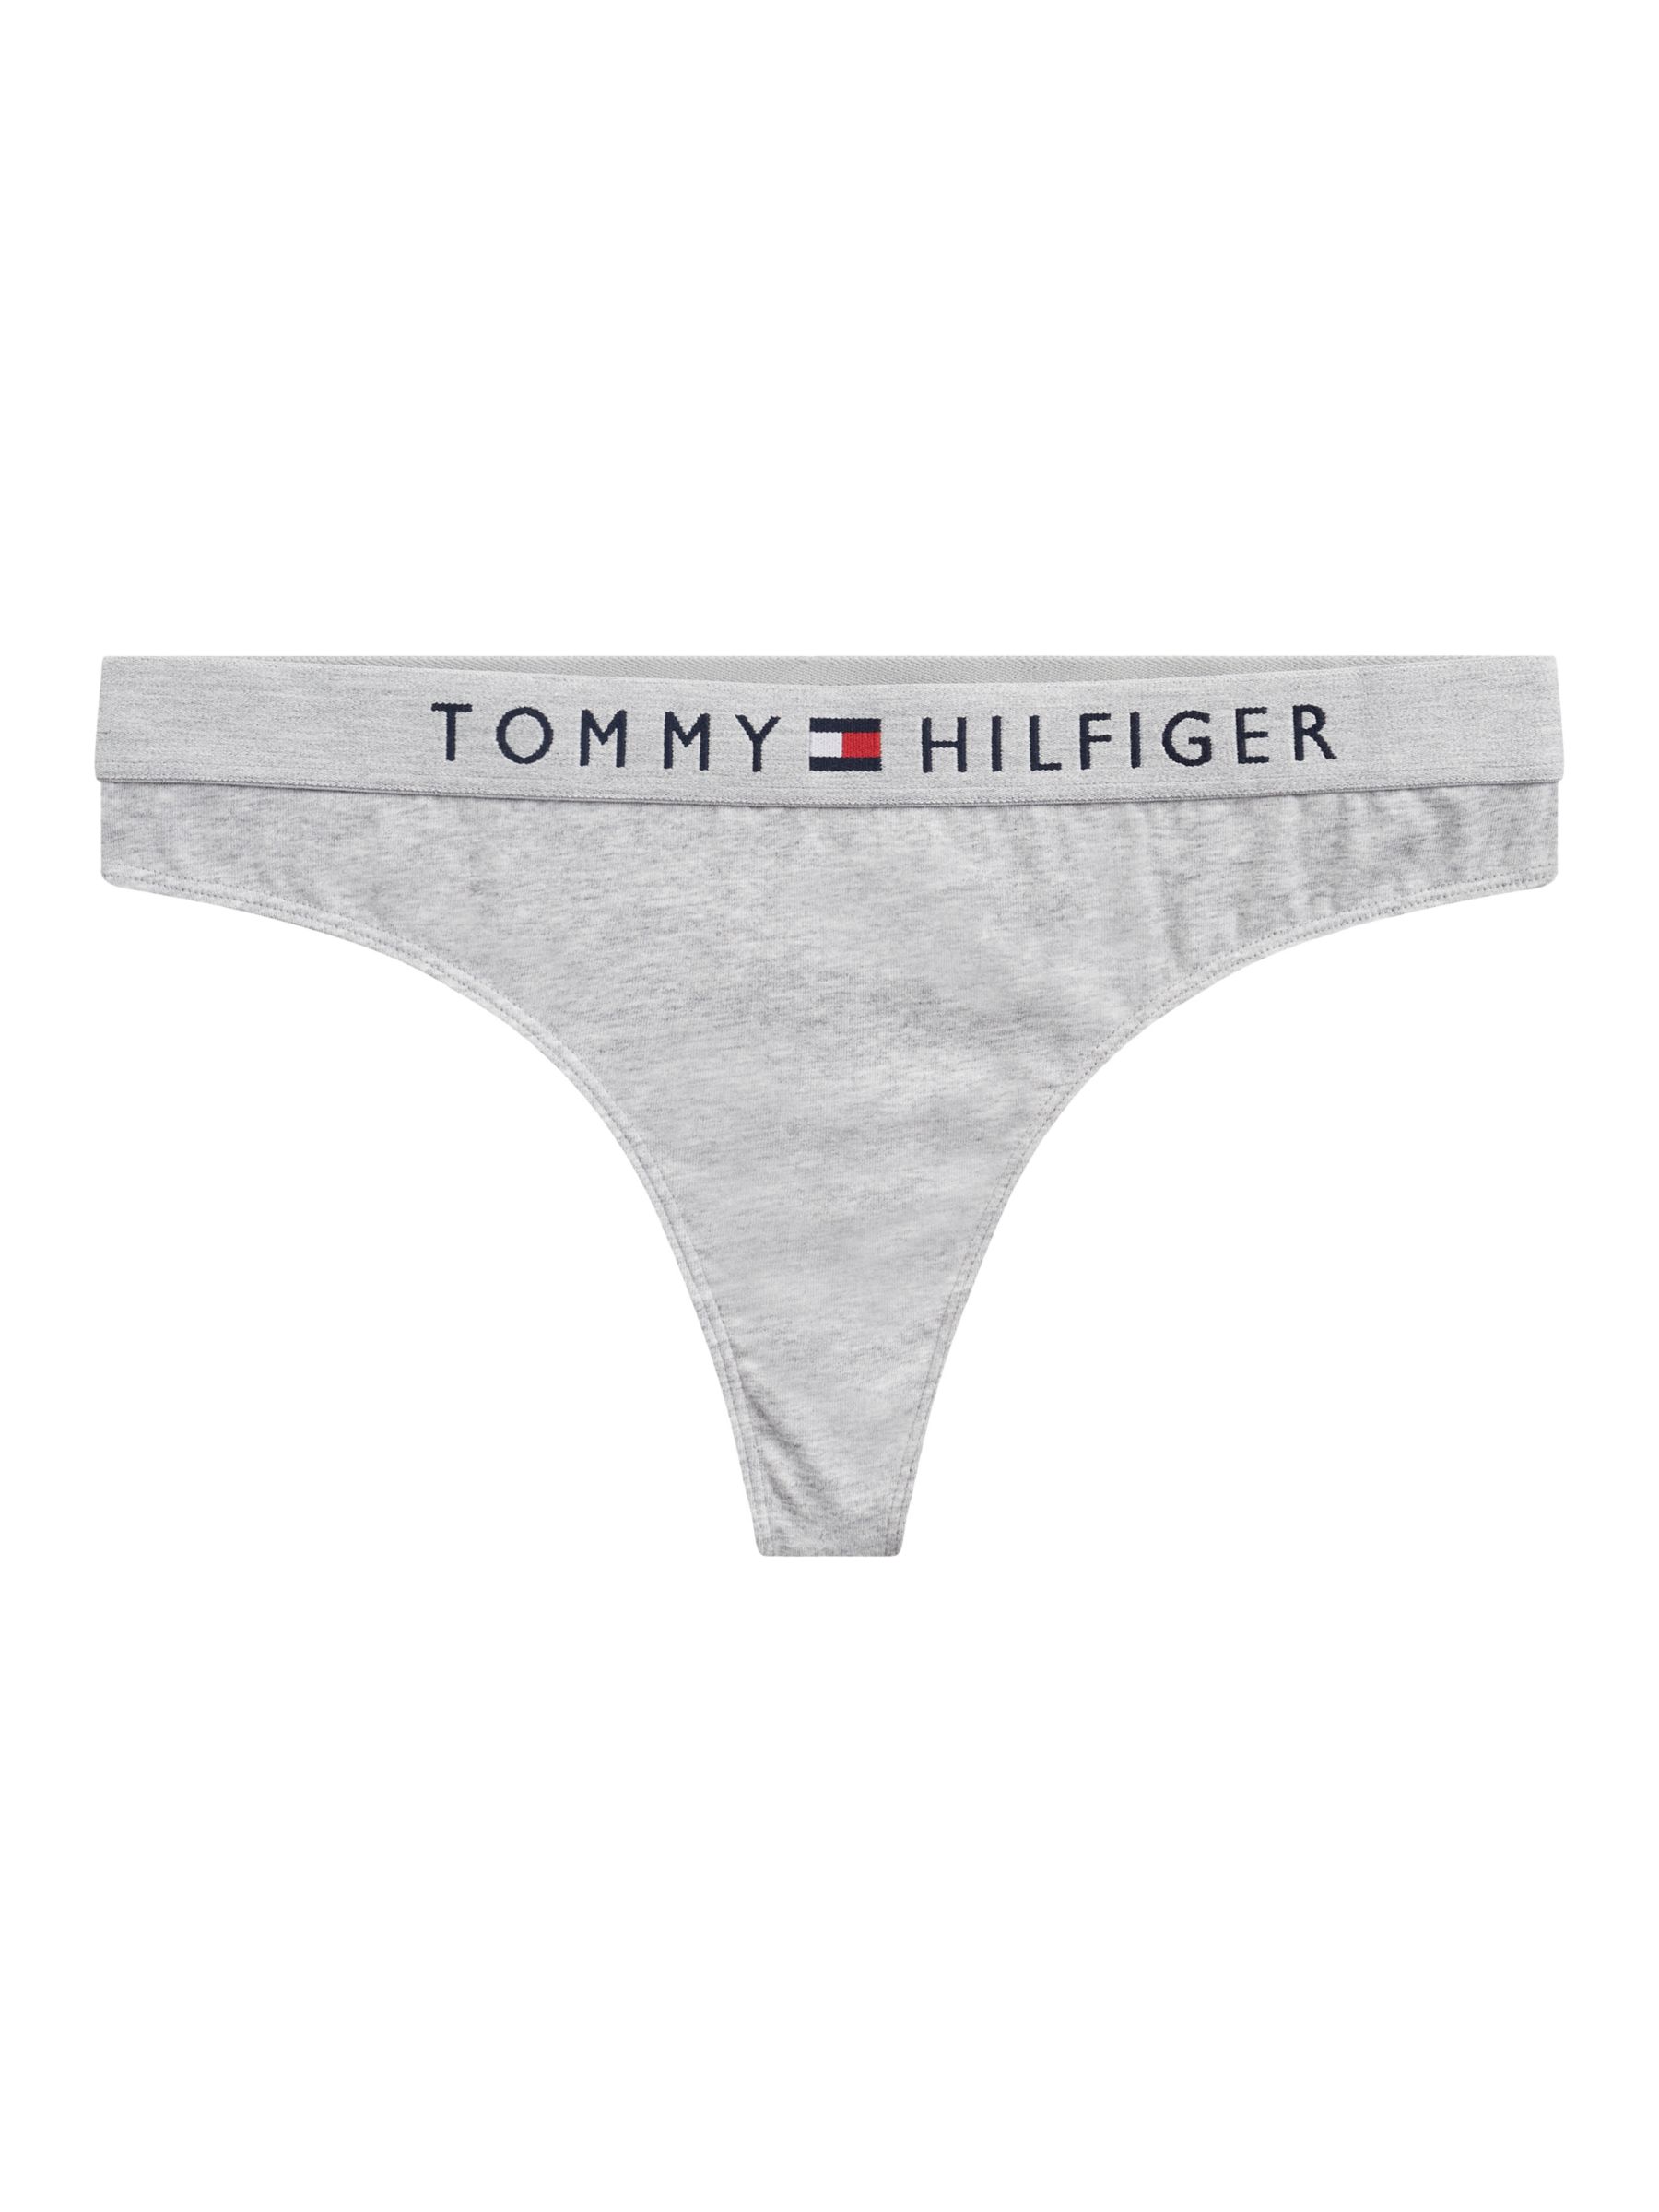 Tommy Hilfiger Iconic Cotton Thong, Grey